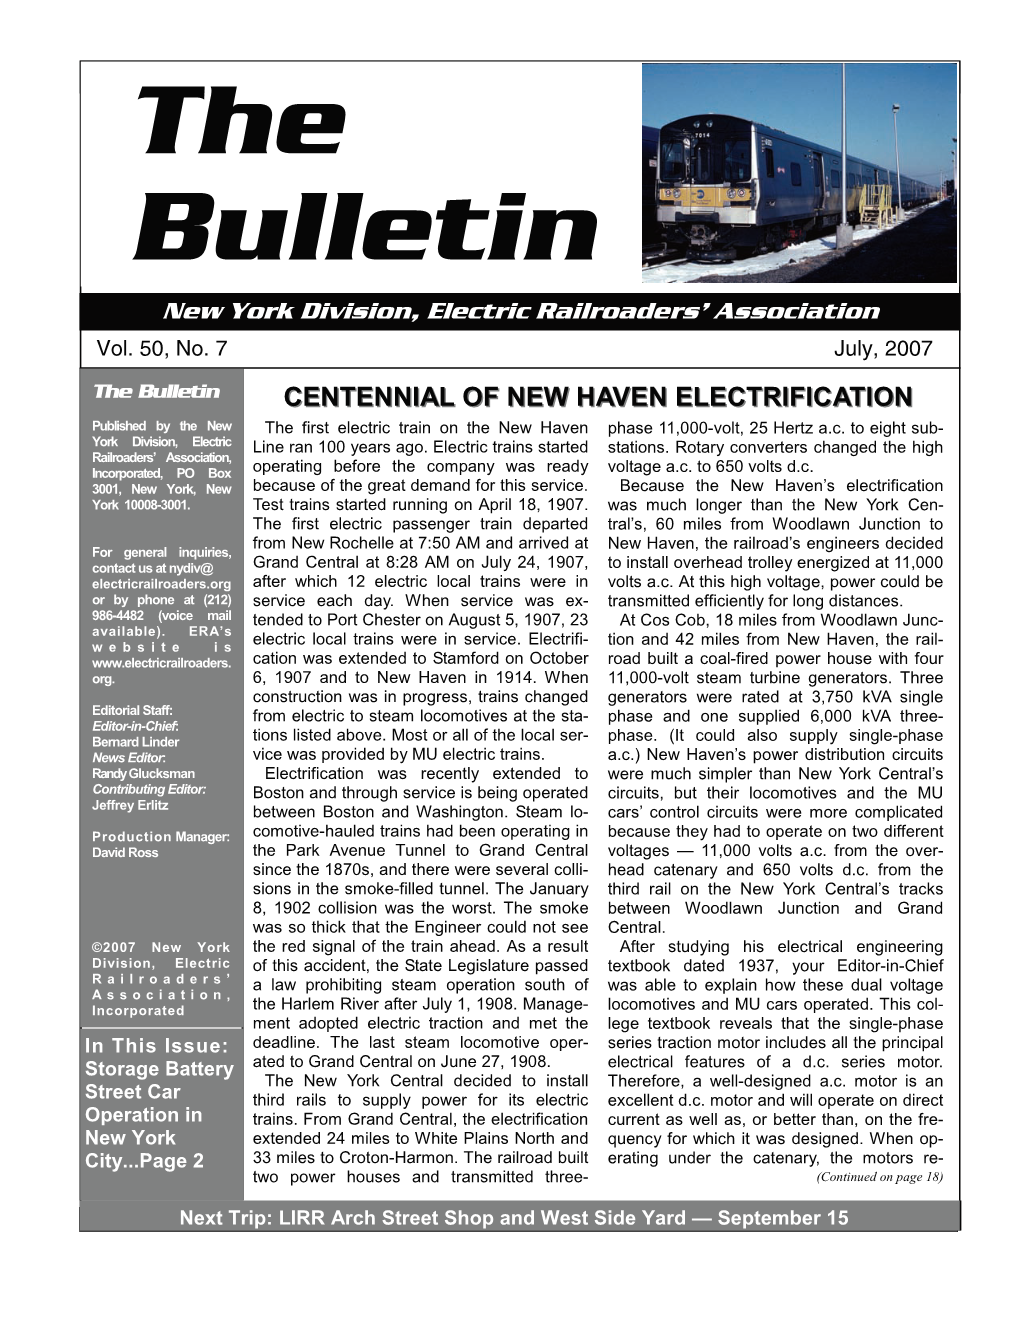 The Bulletin CENTENNIAL of NEW HAVEN ELECTRIFICATION Published by the New the First Electric Train on the New Haven Phase 11,000-Volt, 25 Hertz A.C